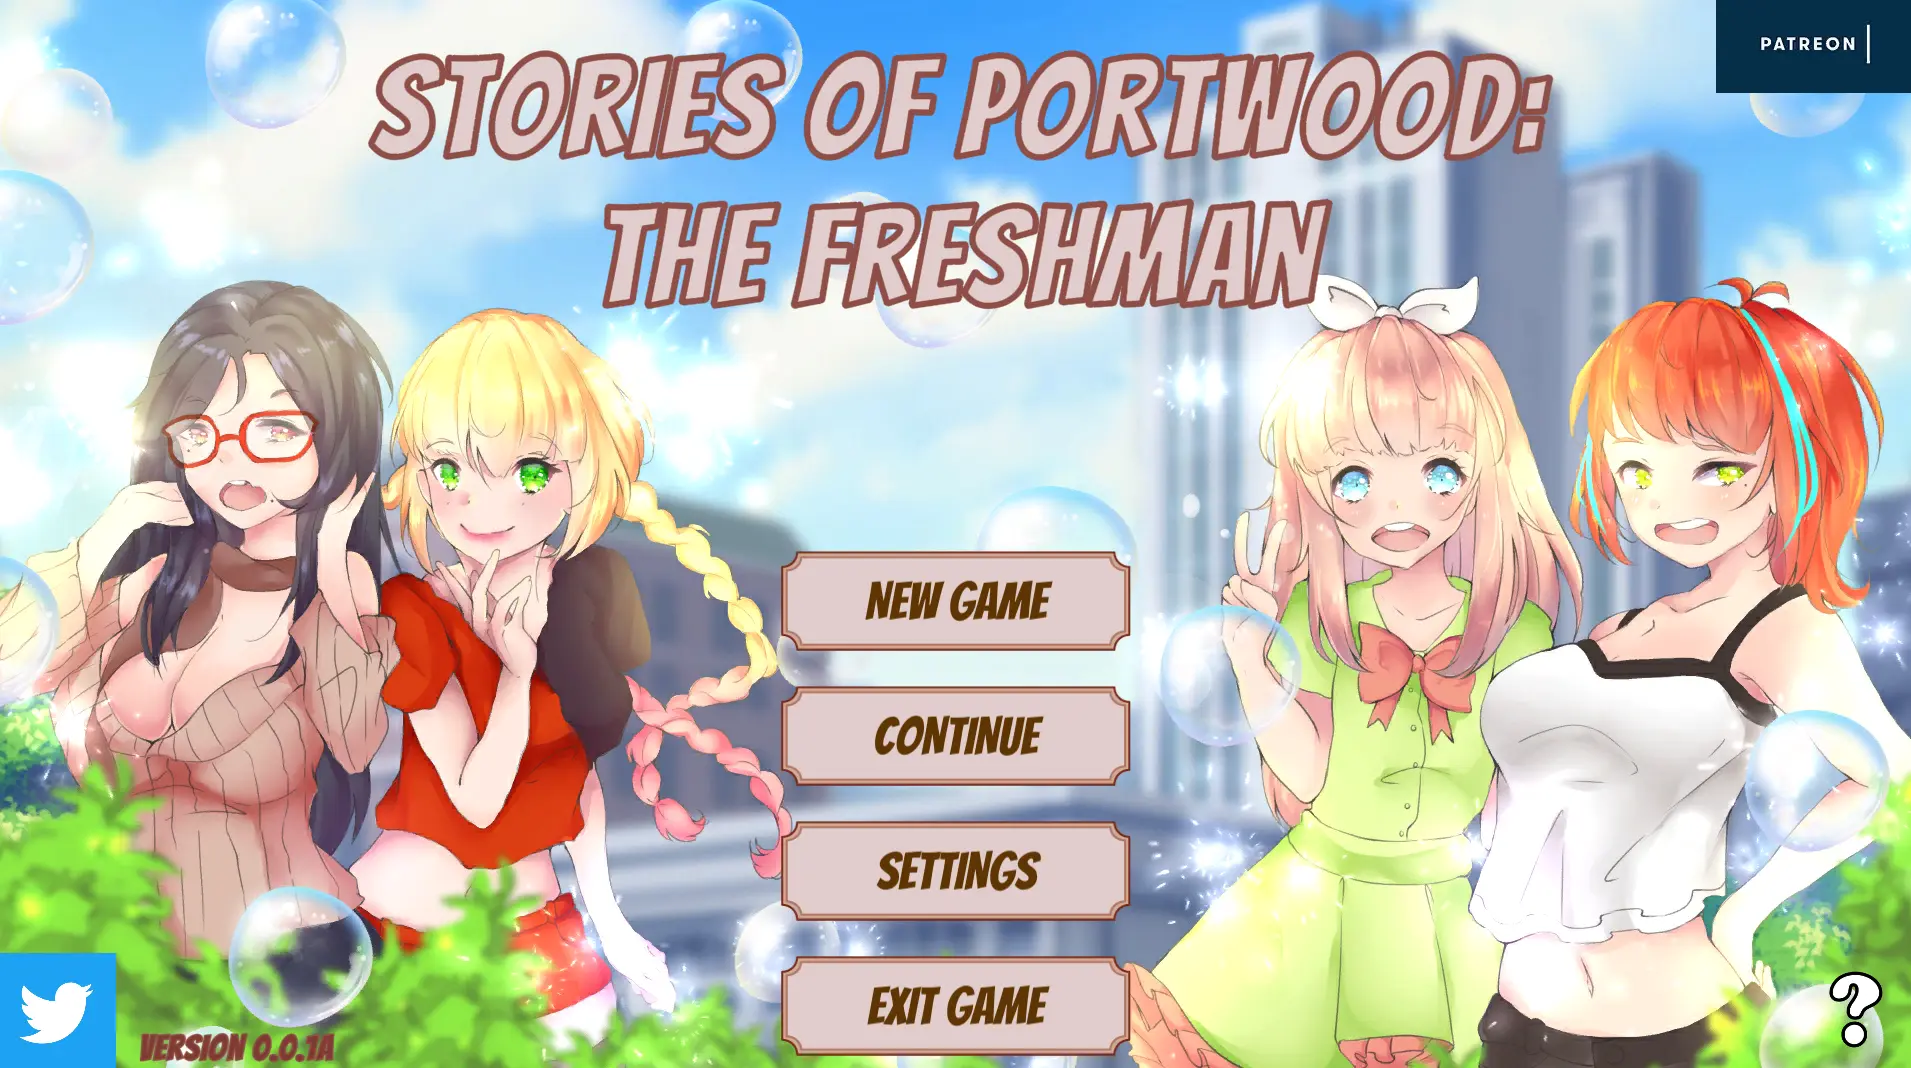 Stories of Portwood: The Freshman [v0.0.1a] main image